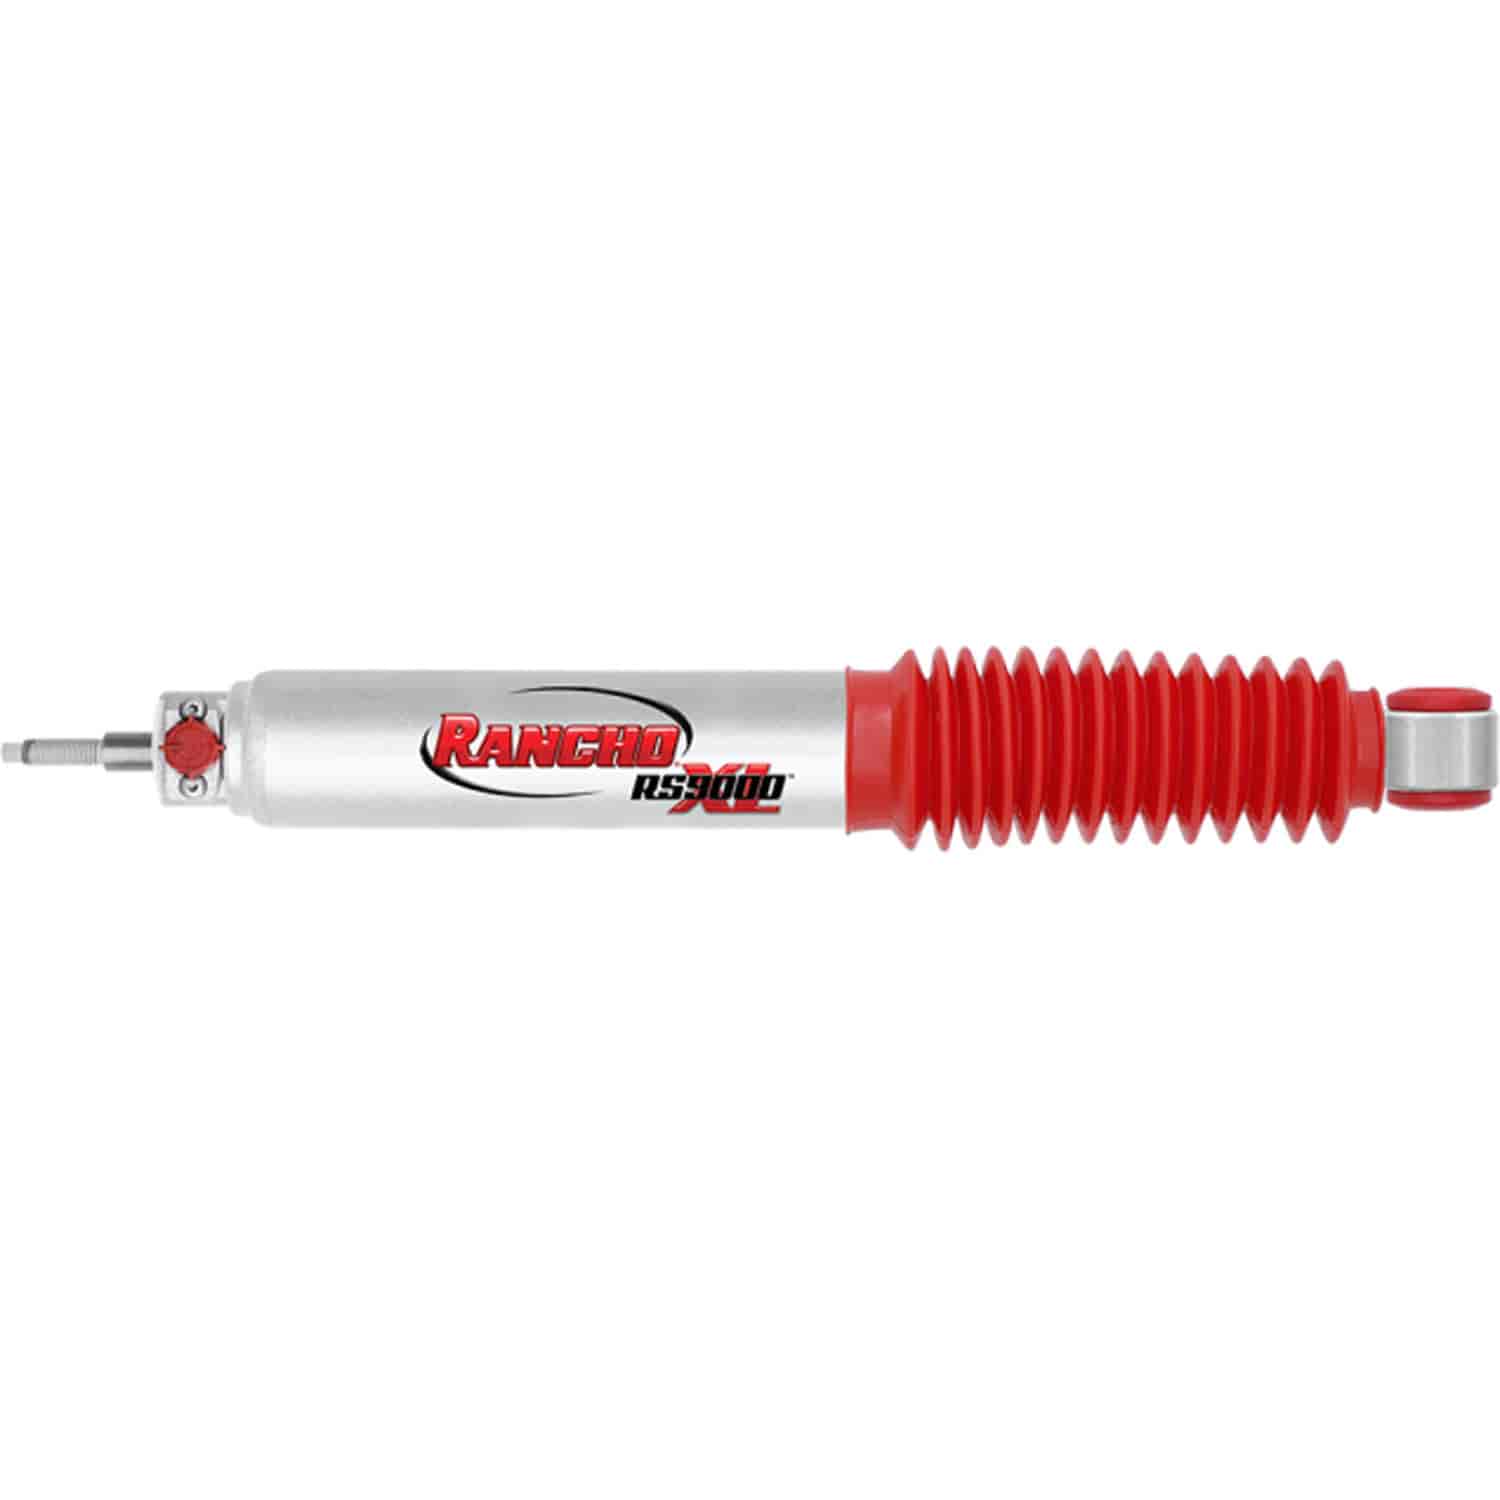 RS9000XL Rear Shock Absorber Fits for Nissan Commercial